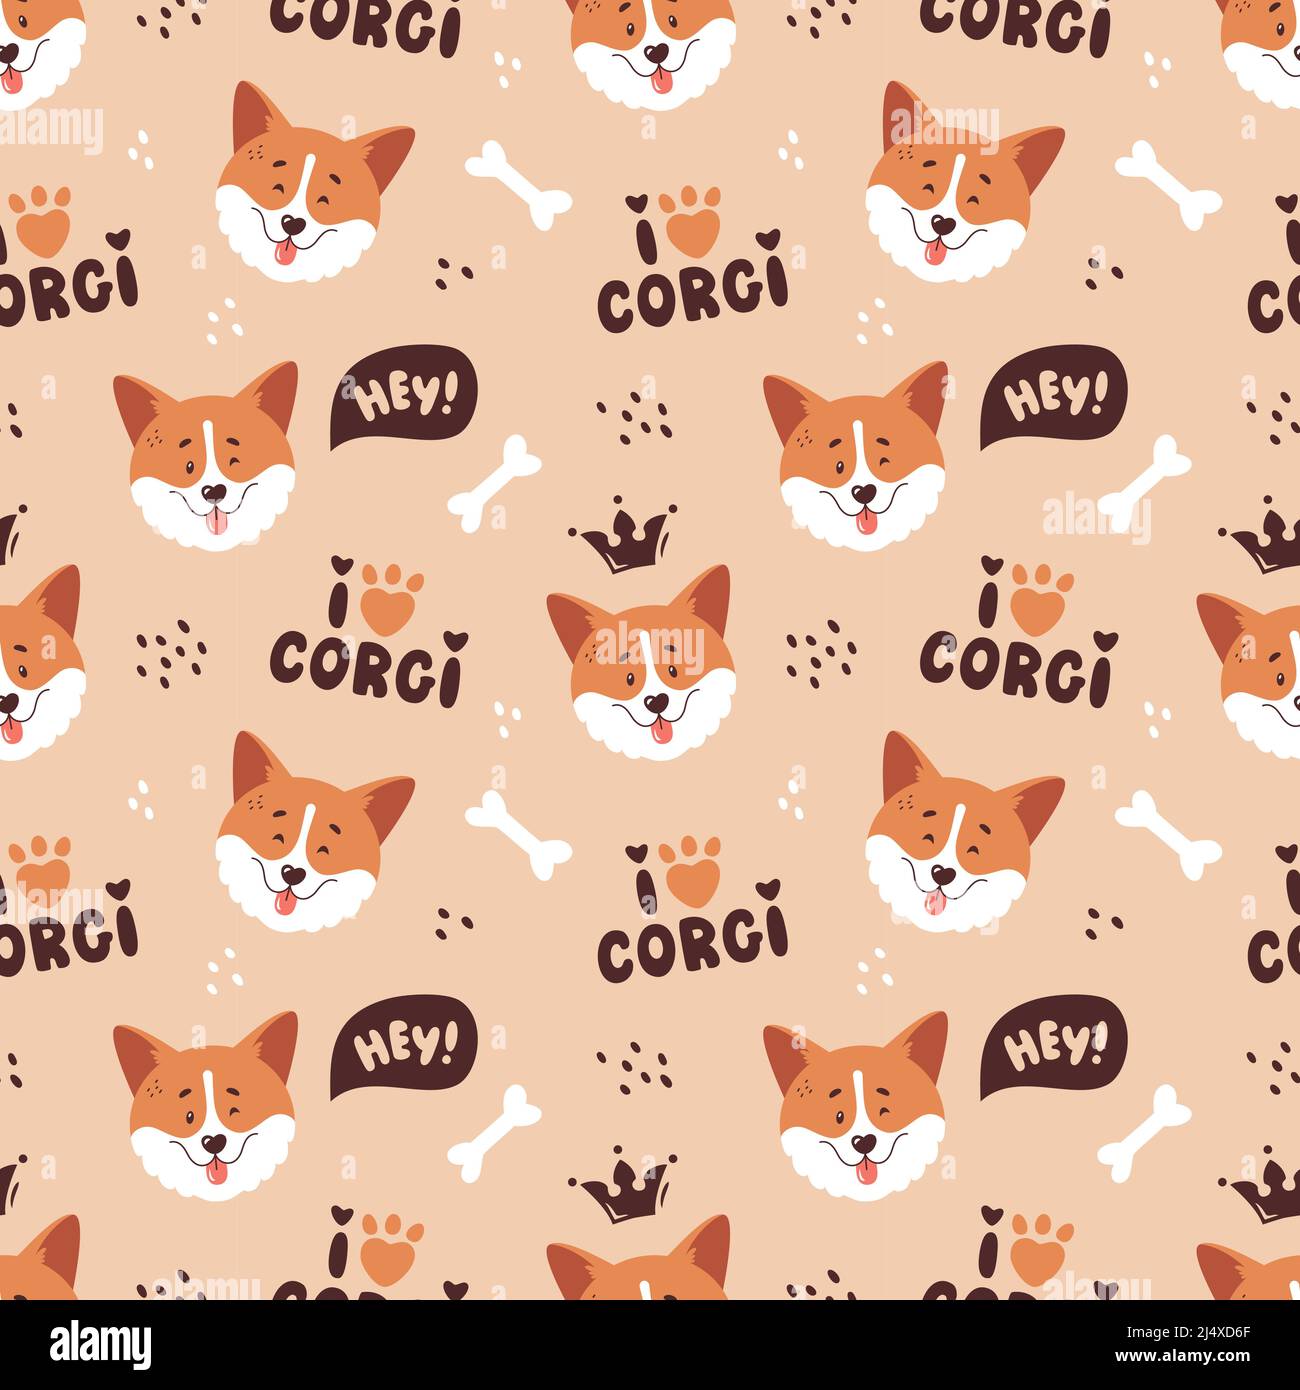 Corgi seamless pattern. Cute smiling welsh corgi faces and hand drawing letterings. Happy dog characters. Trendy vector background. Stock Vector